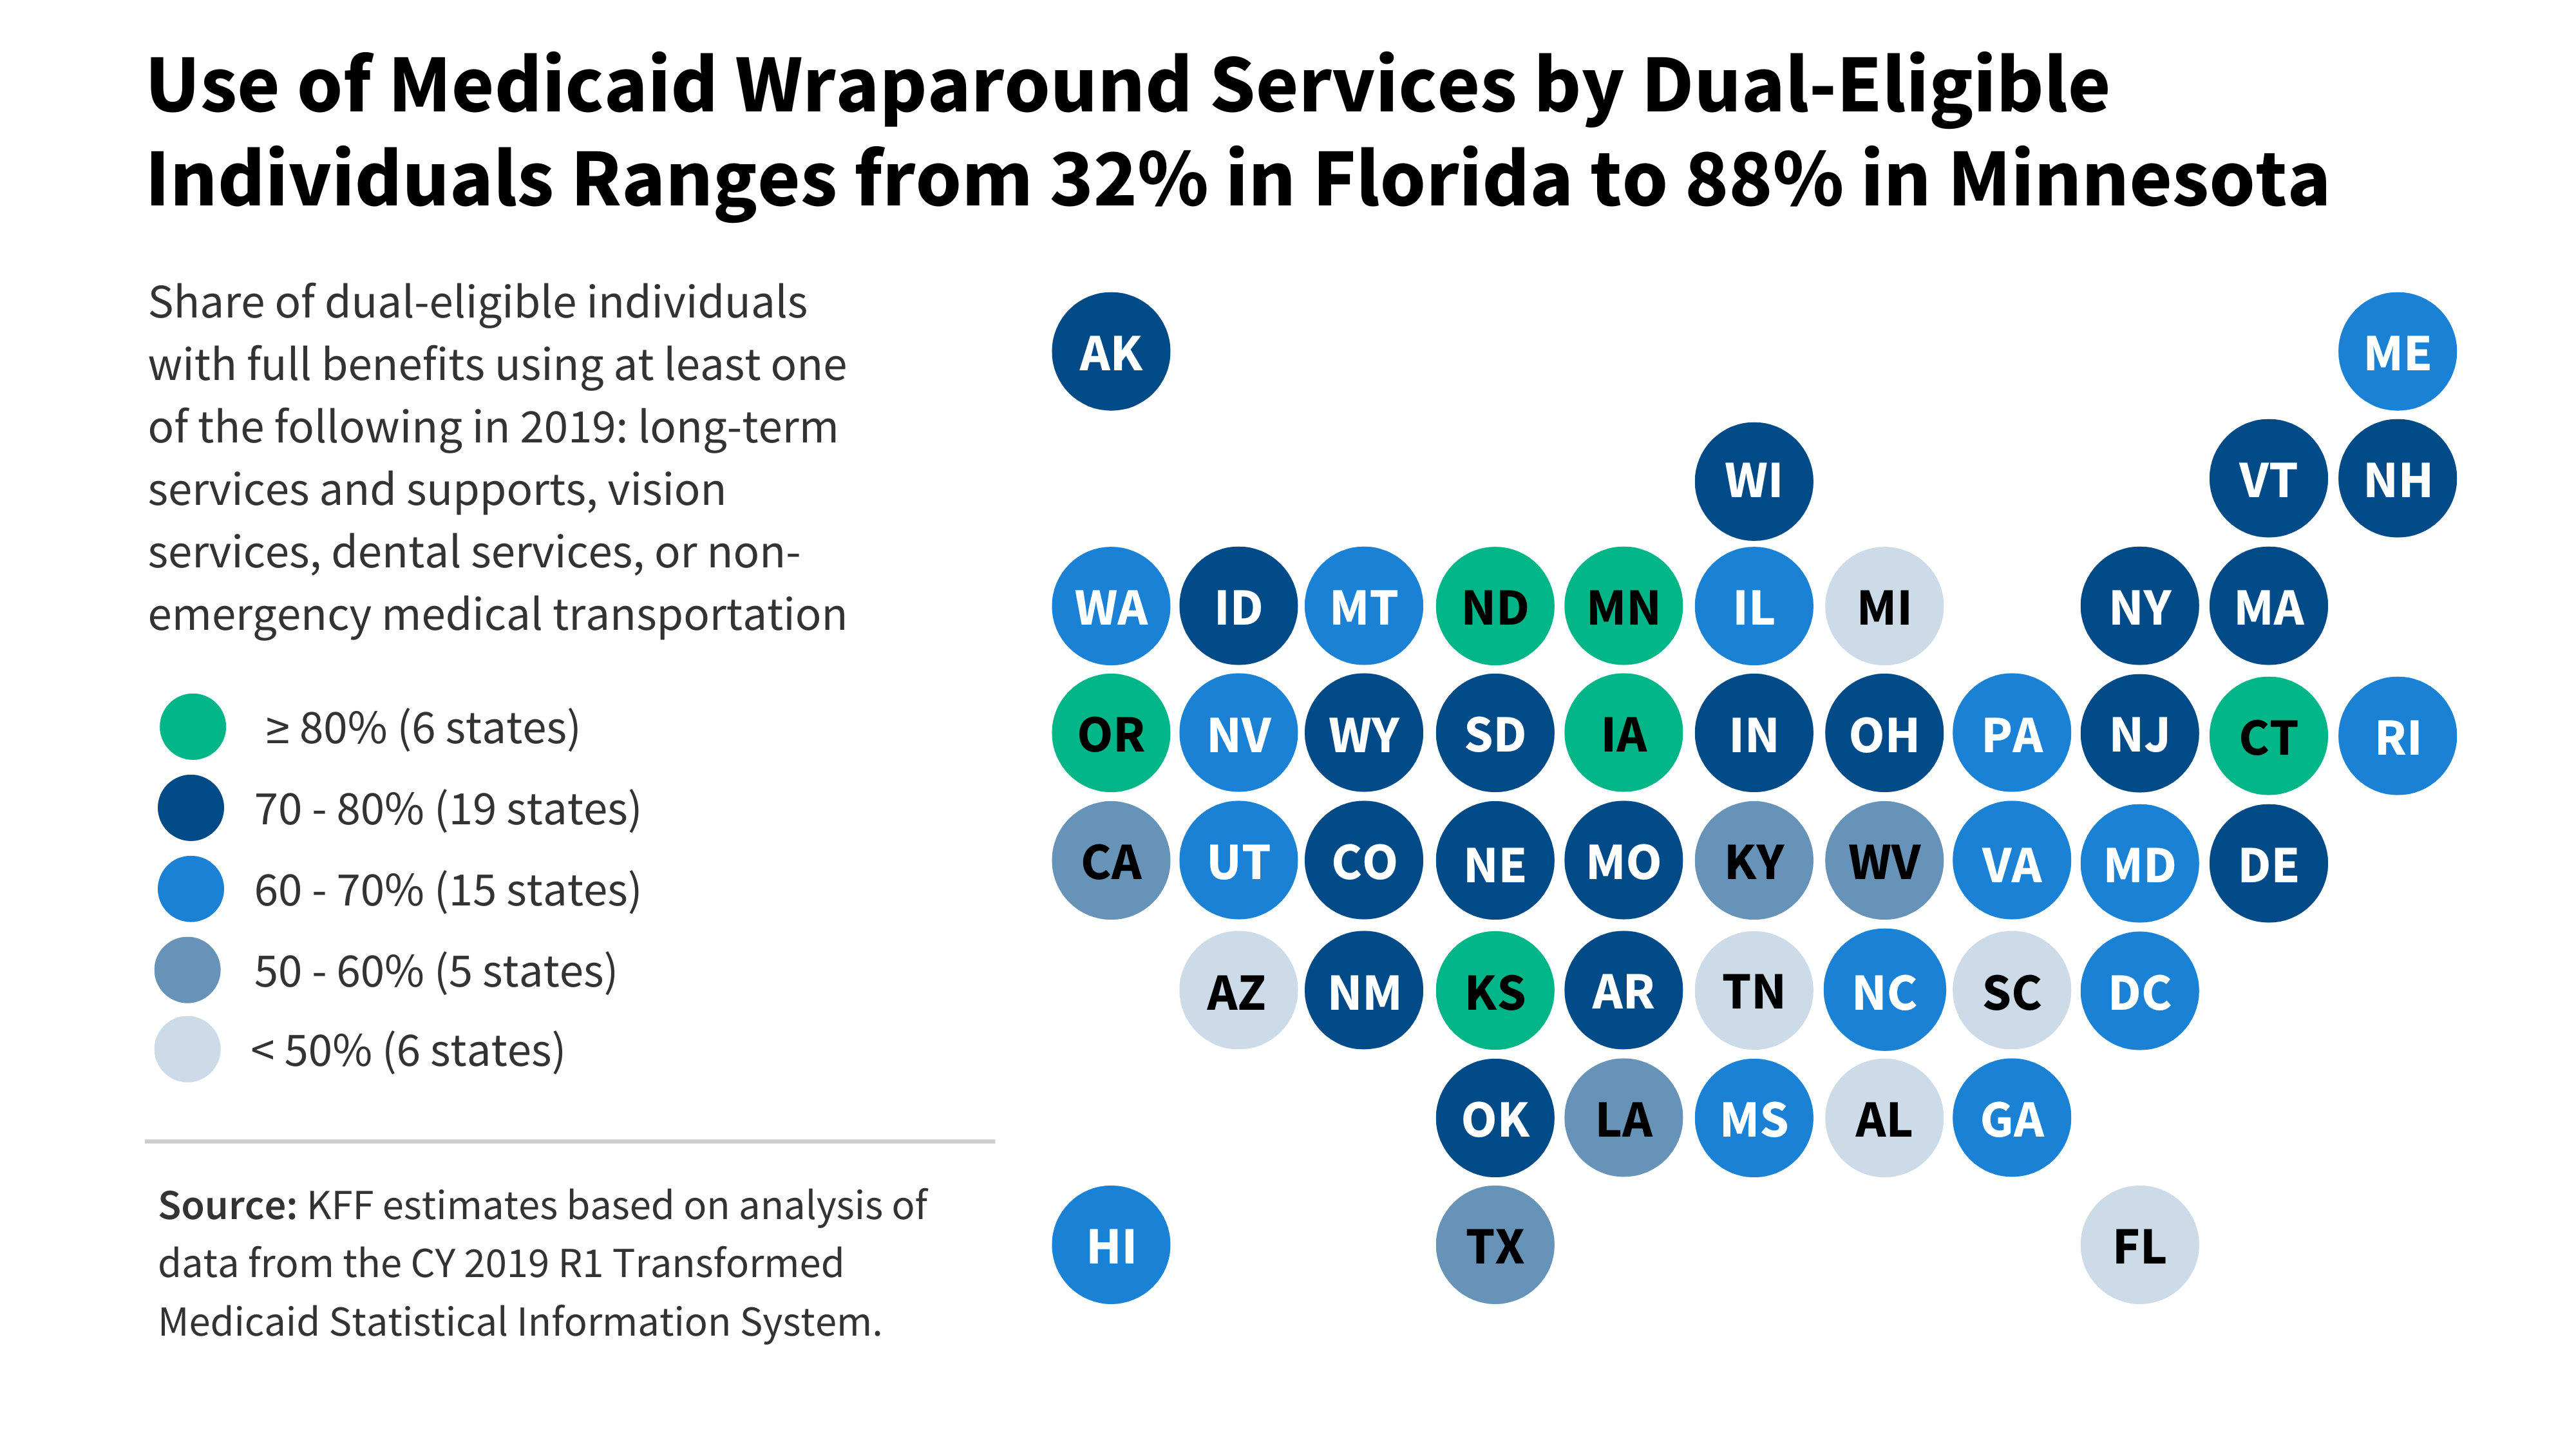 You are currently viewing How Does Use of Medicaid Wraparound Services by Dual-Eligible Individuals Vary by Service, State, and Enrollees’ Demographics?